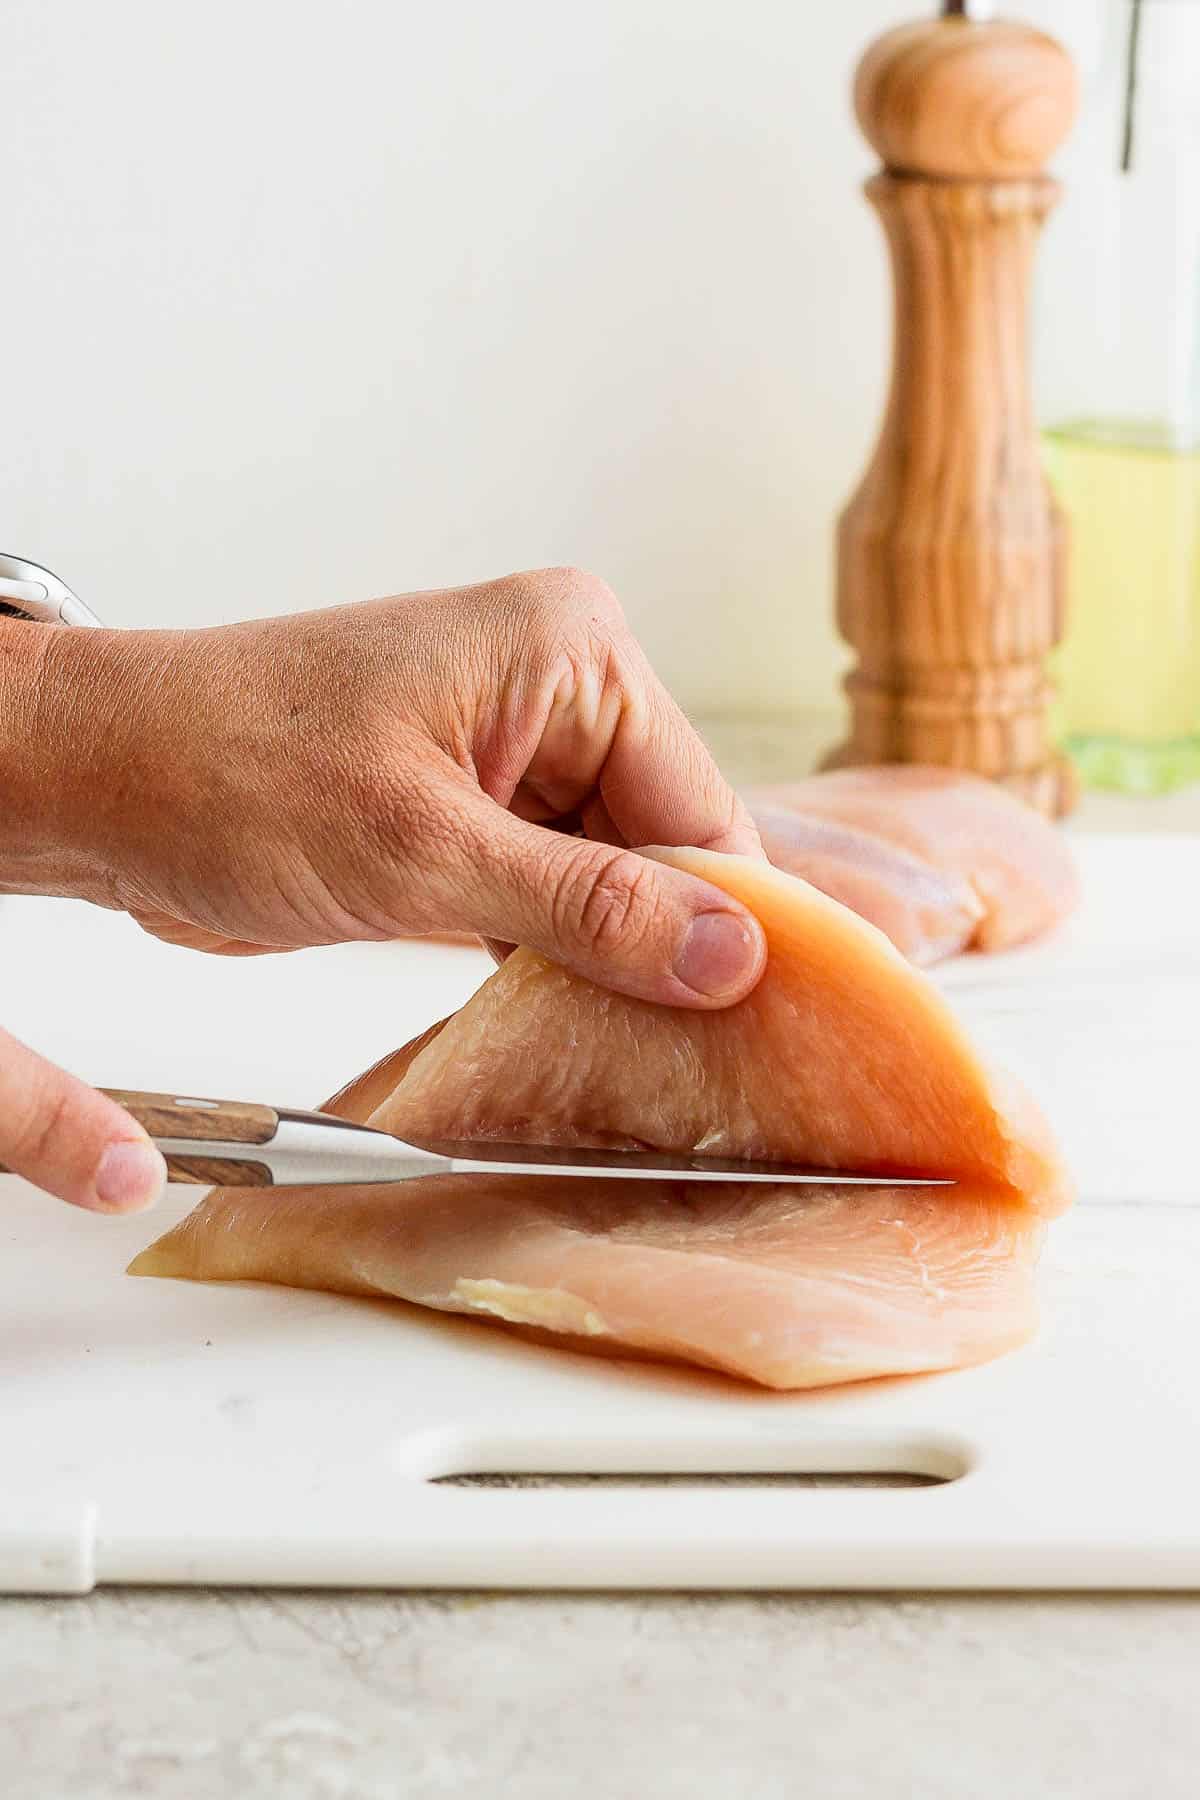 A hand cutting through the chicken breast while the other peels back the top layer.